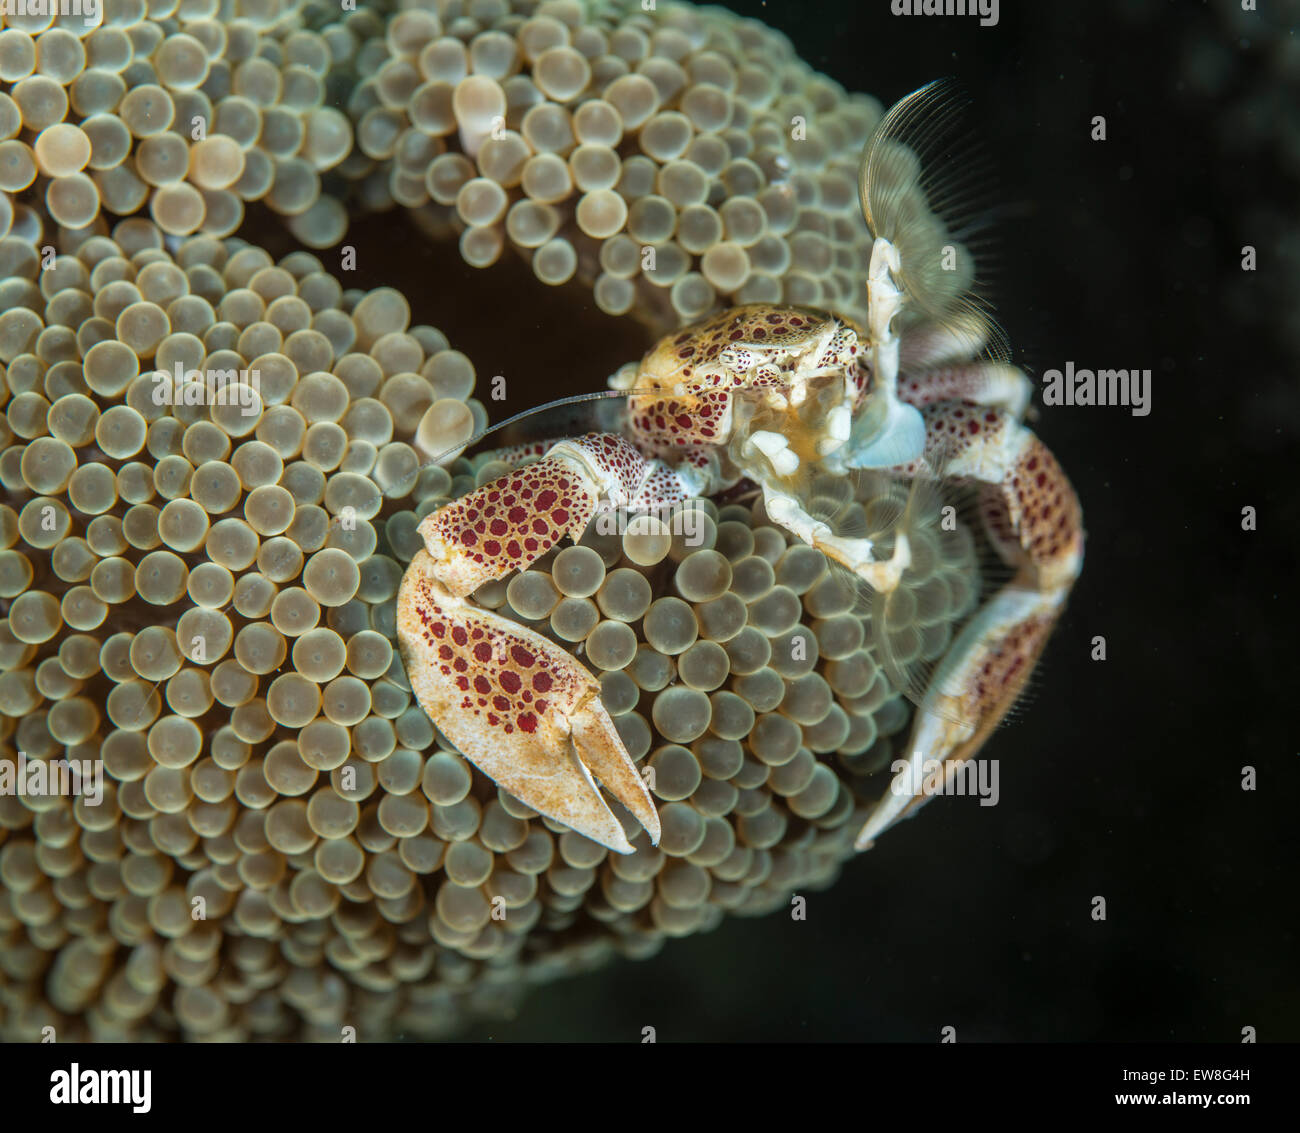 Porcelain crab holding out it's feelers to filter the water for food Stock Photo